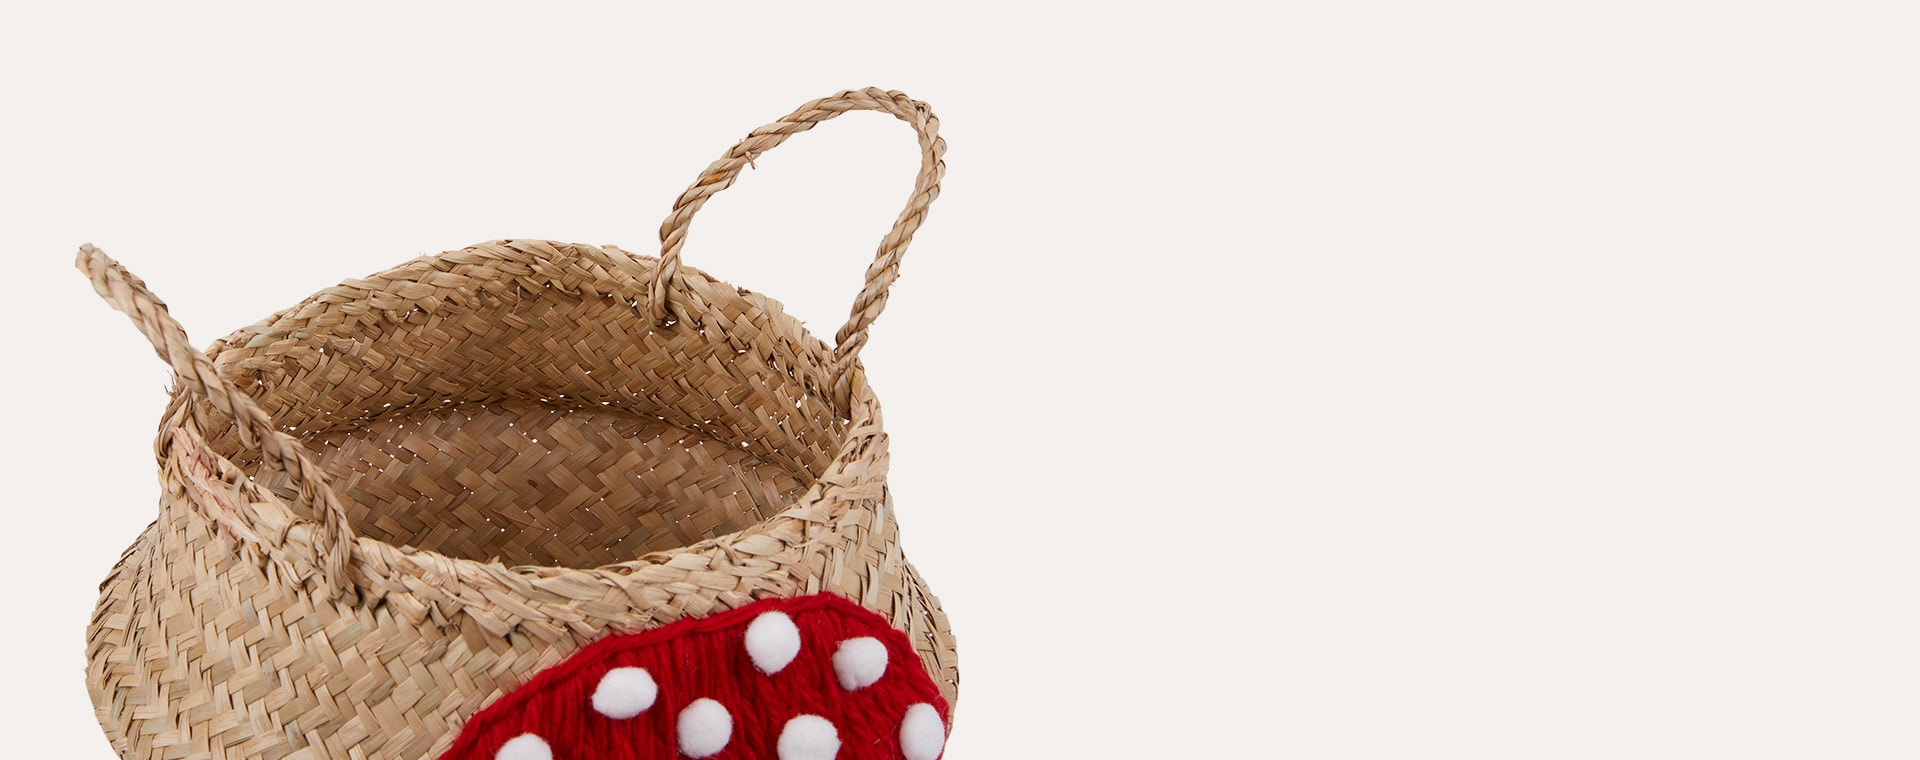 Red Bellybambino Small Toad Stool Basket